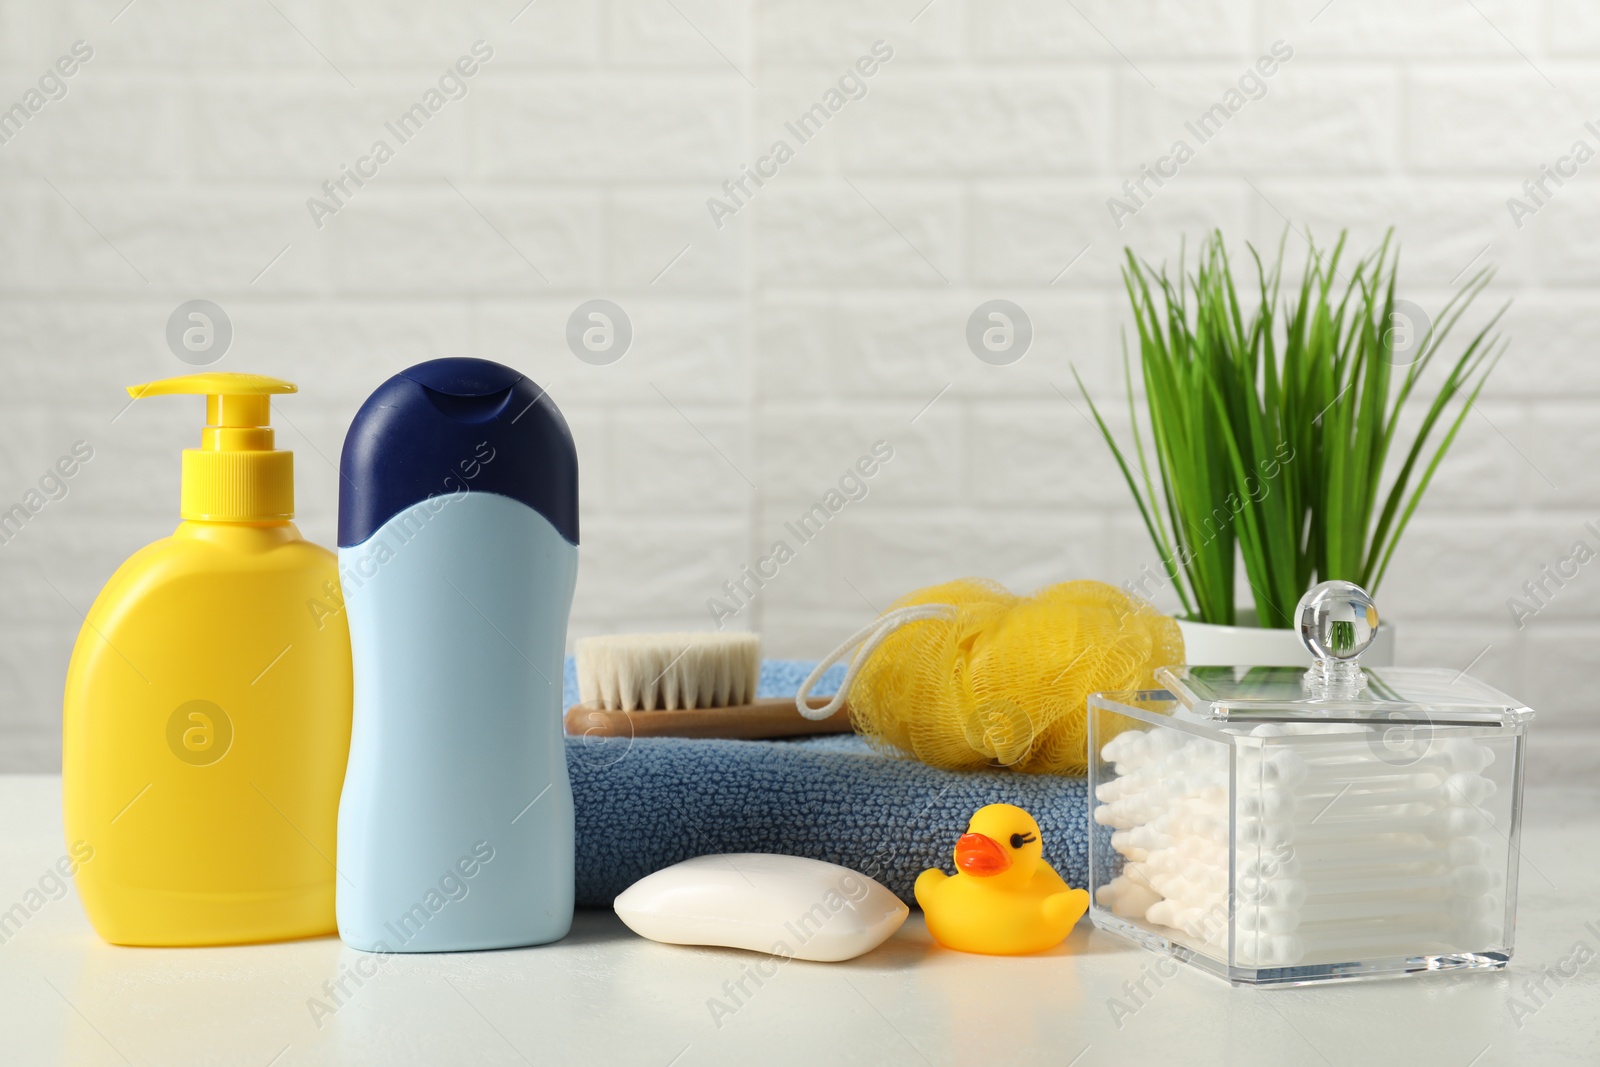 Photo of Baby cosmetic products, bath duck, brush and towel on white table against brick wall